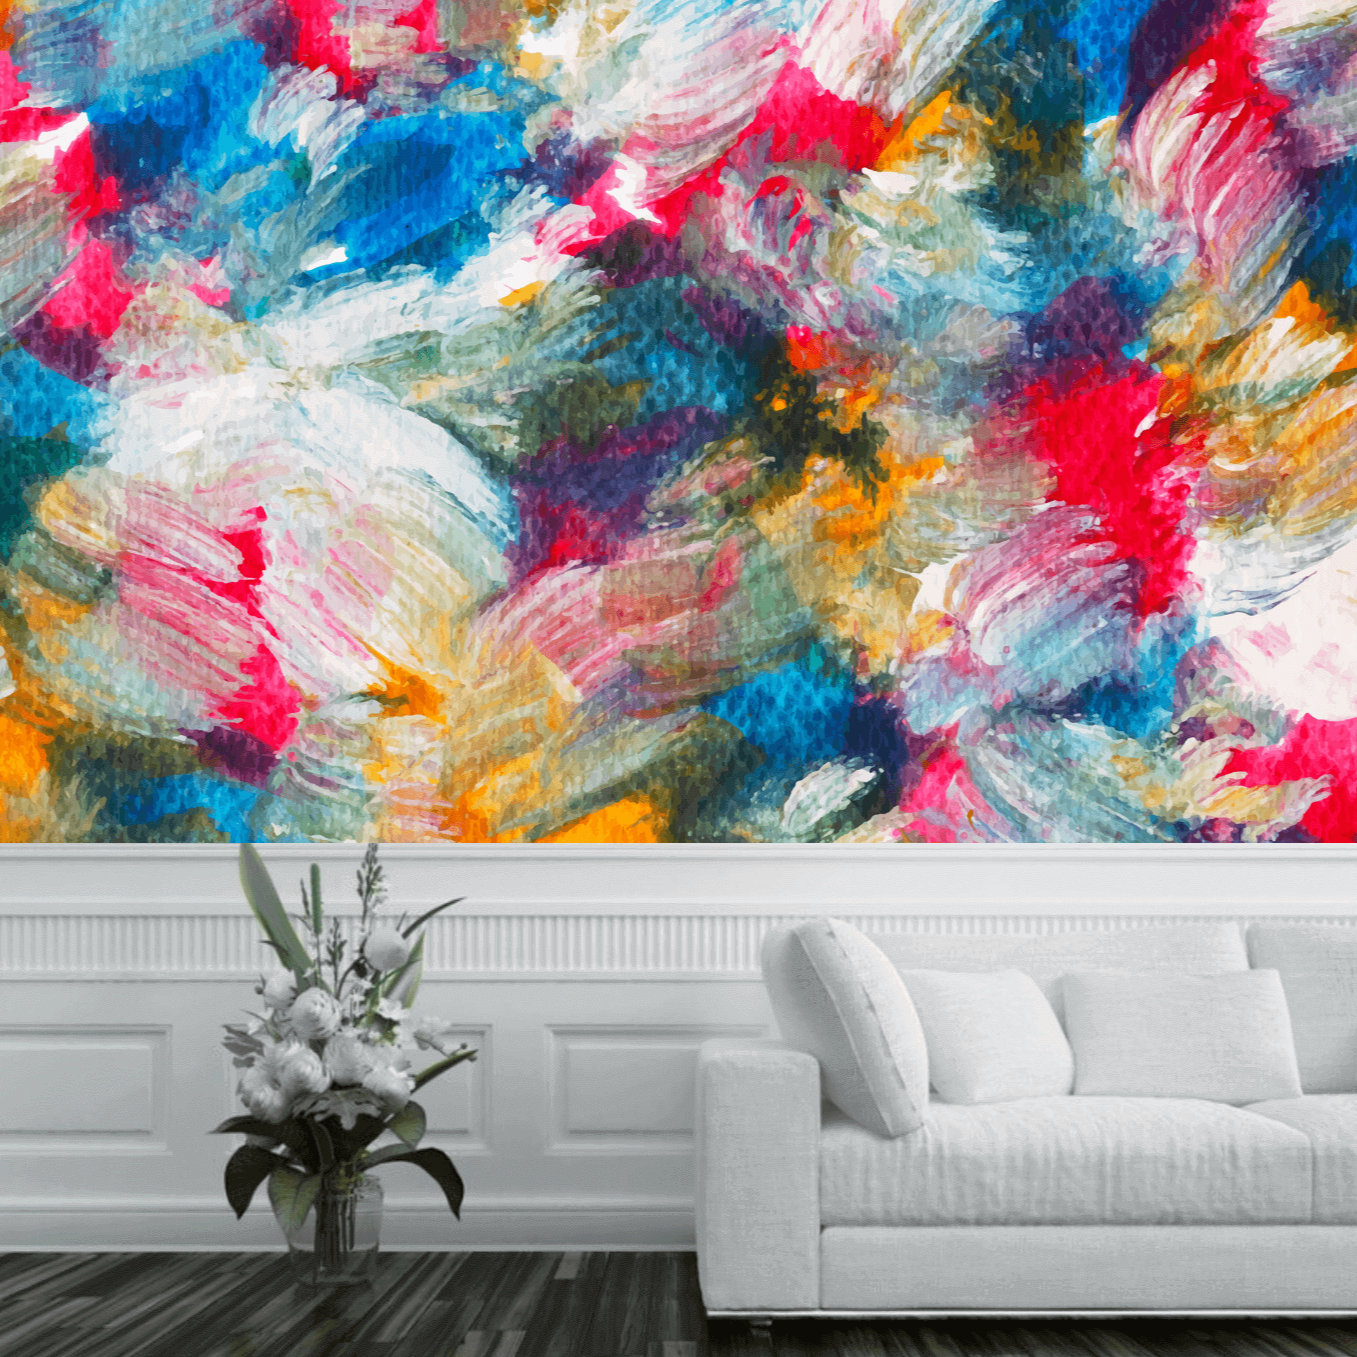 Abstract Colorful Brush Stroke Mural Wallpaper (SqM)